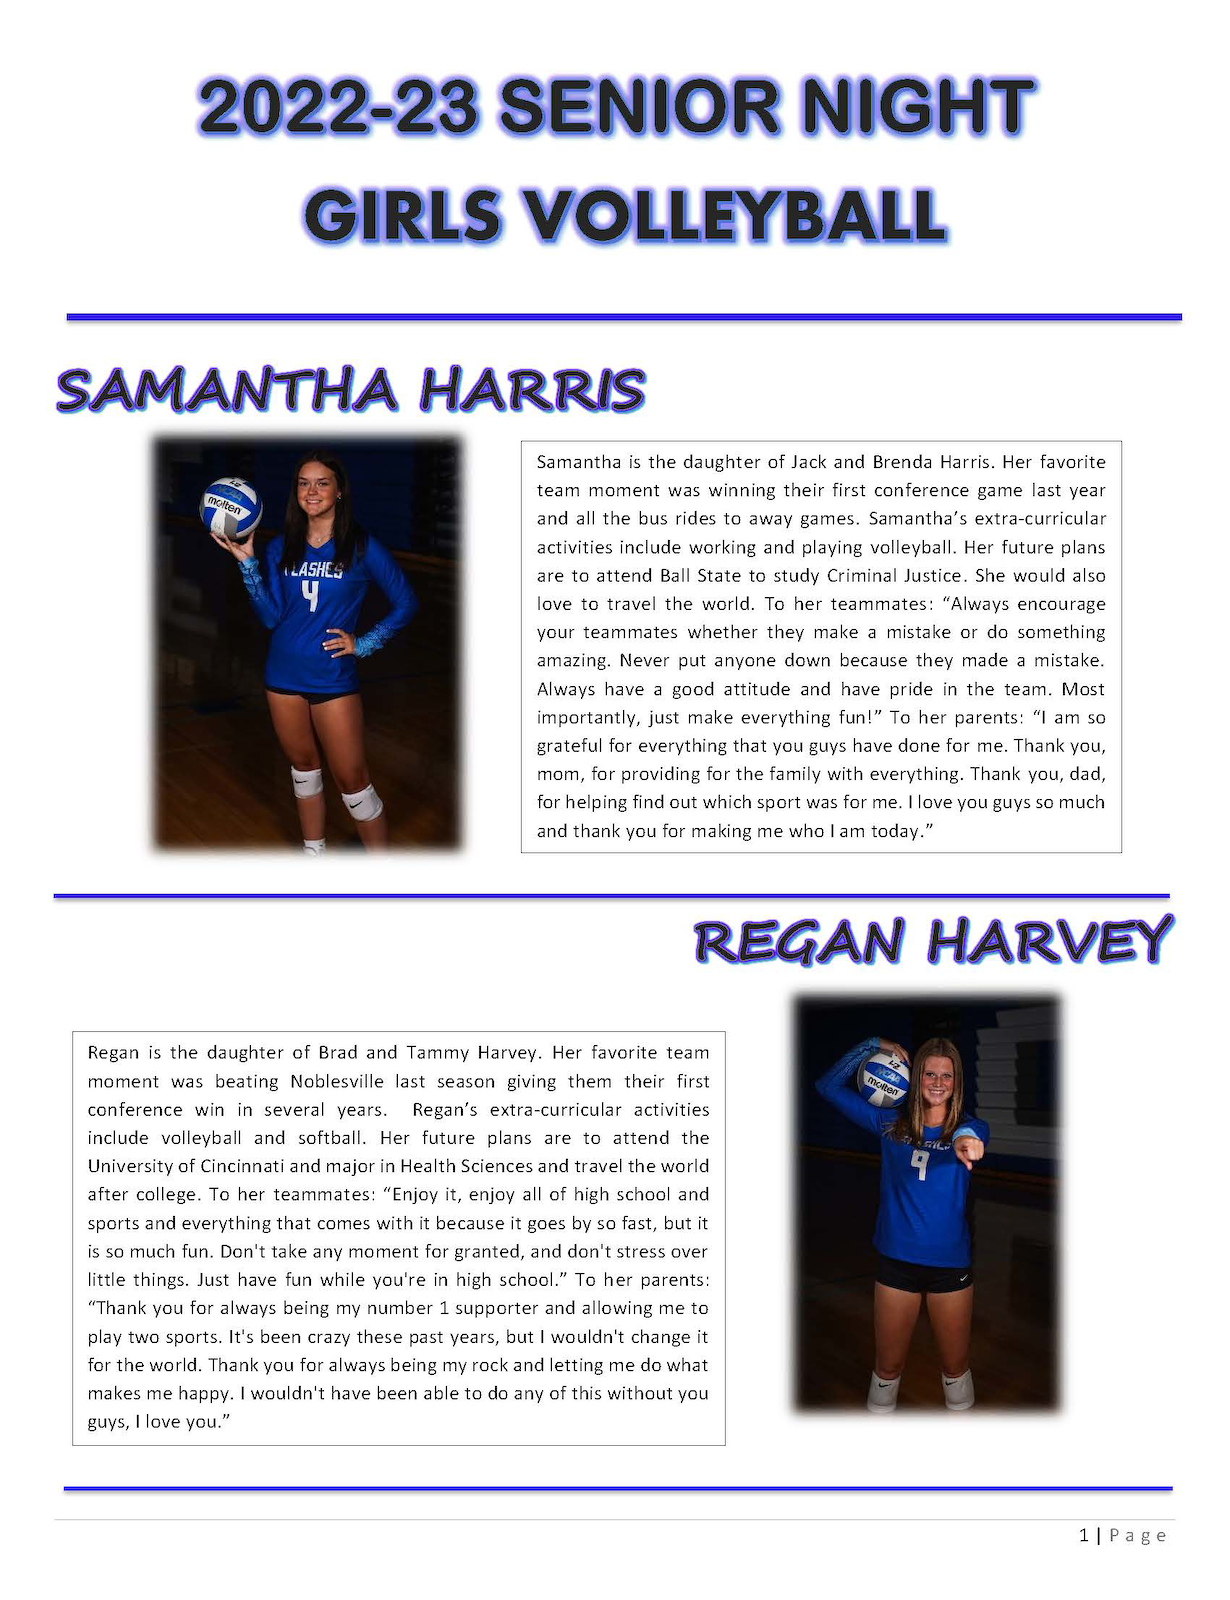 22-23 Girls volleyball Senior Night (1)_Page_1.png